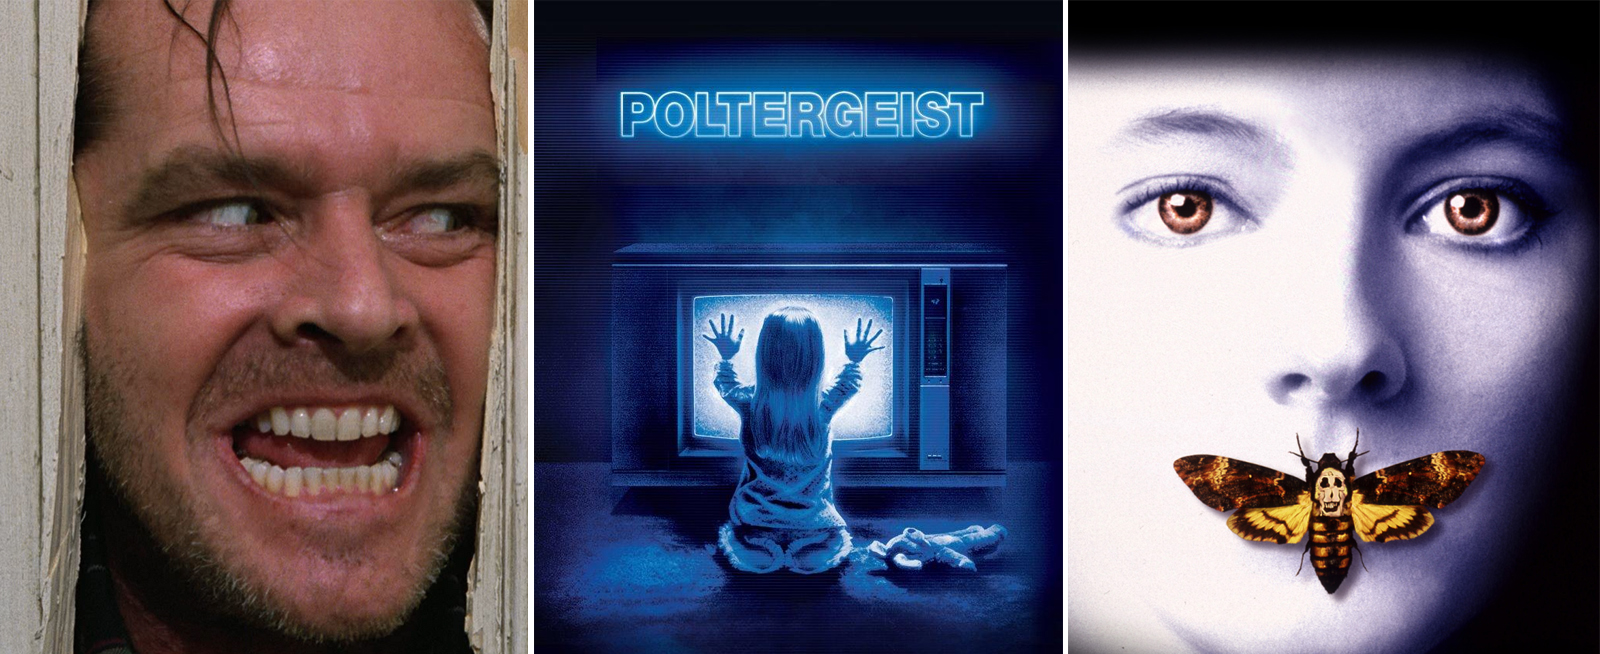 From left to right: The Shining, Poltergeist, and Silence of the Lambs.